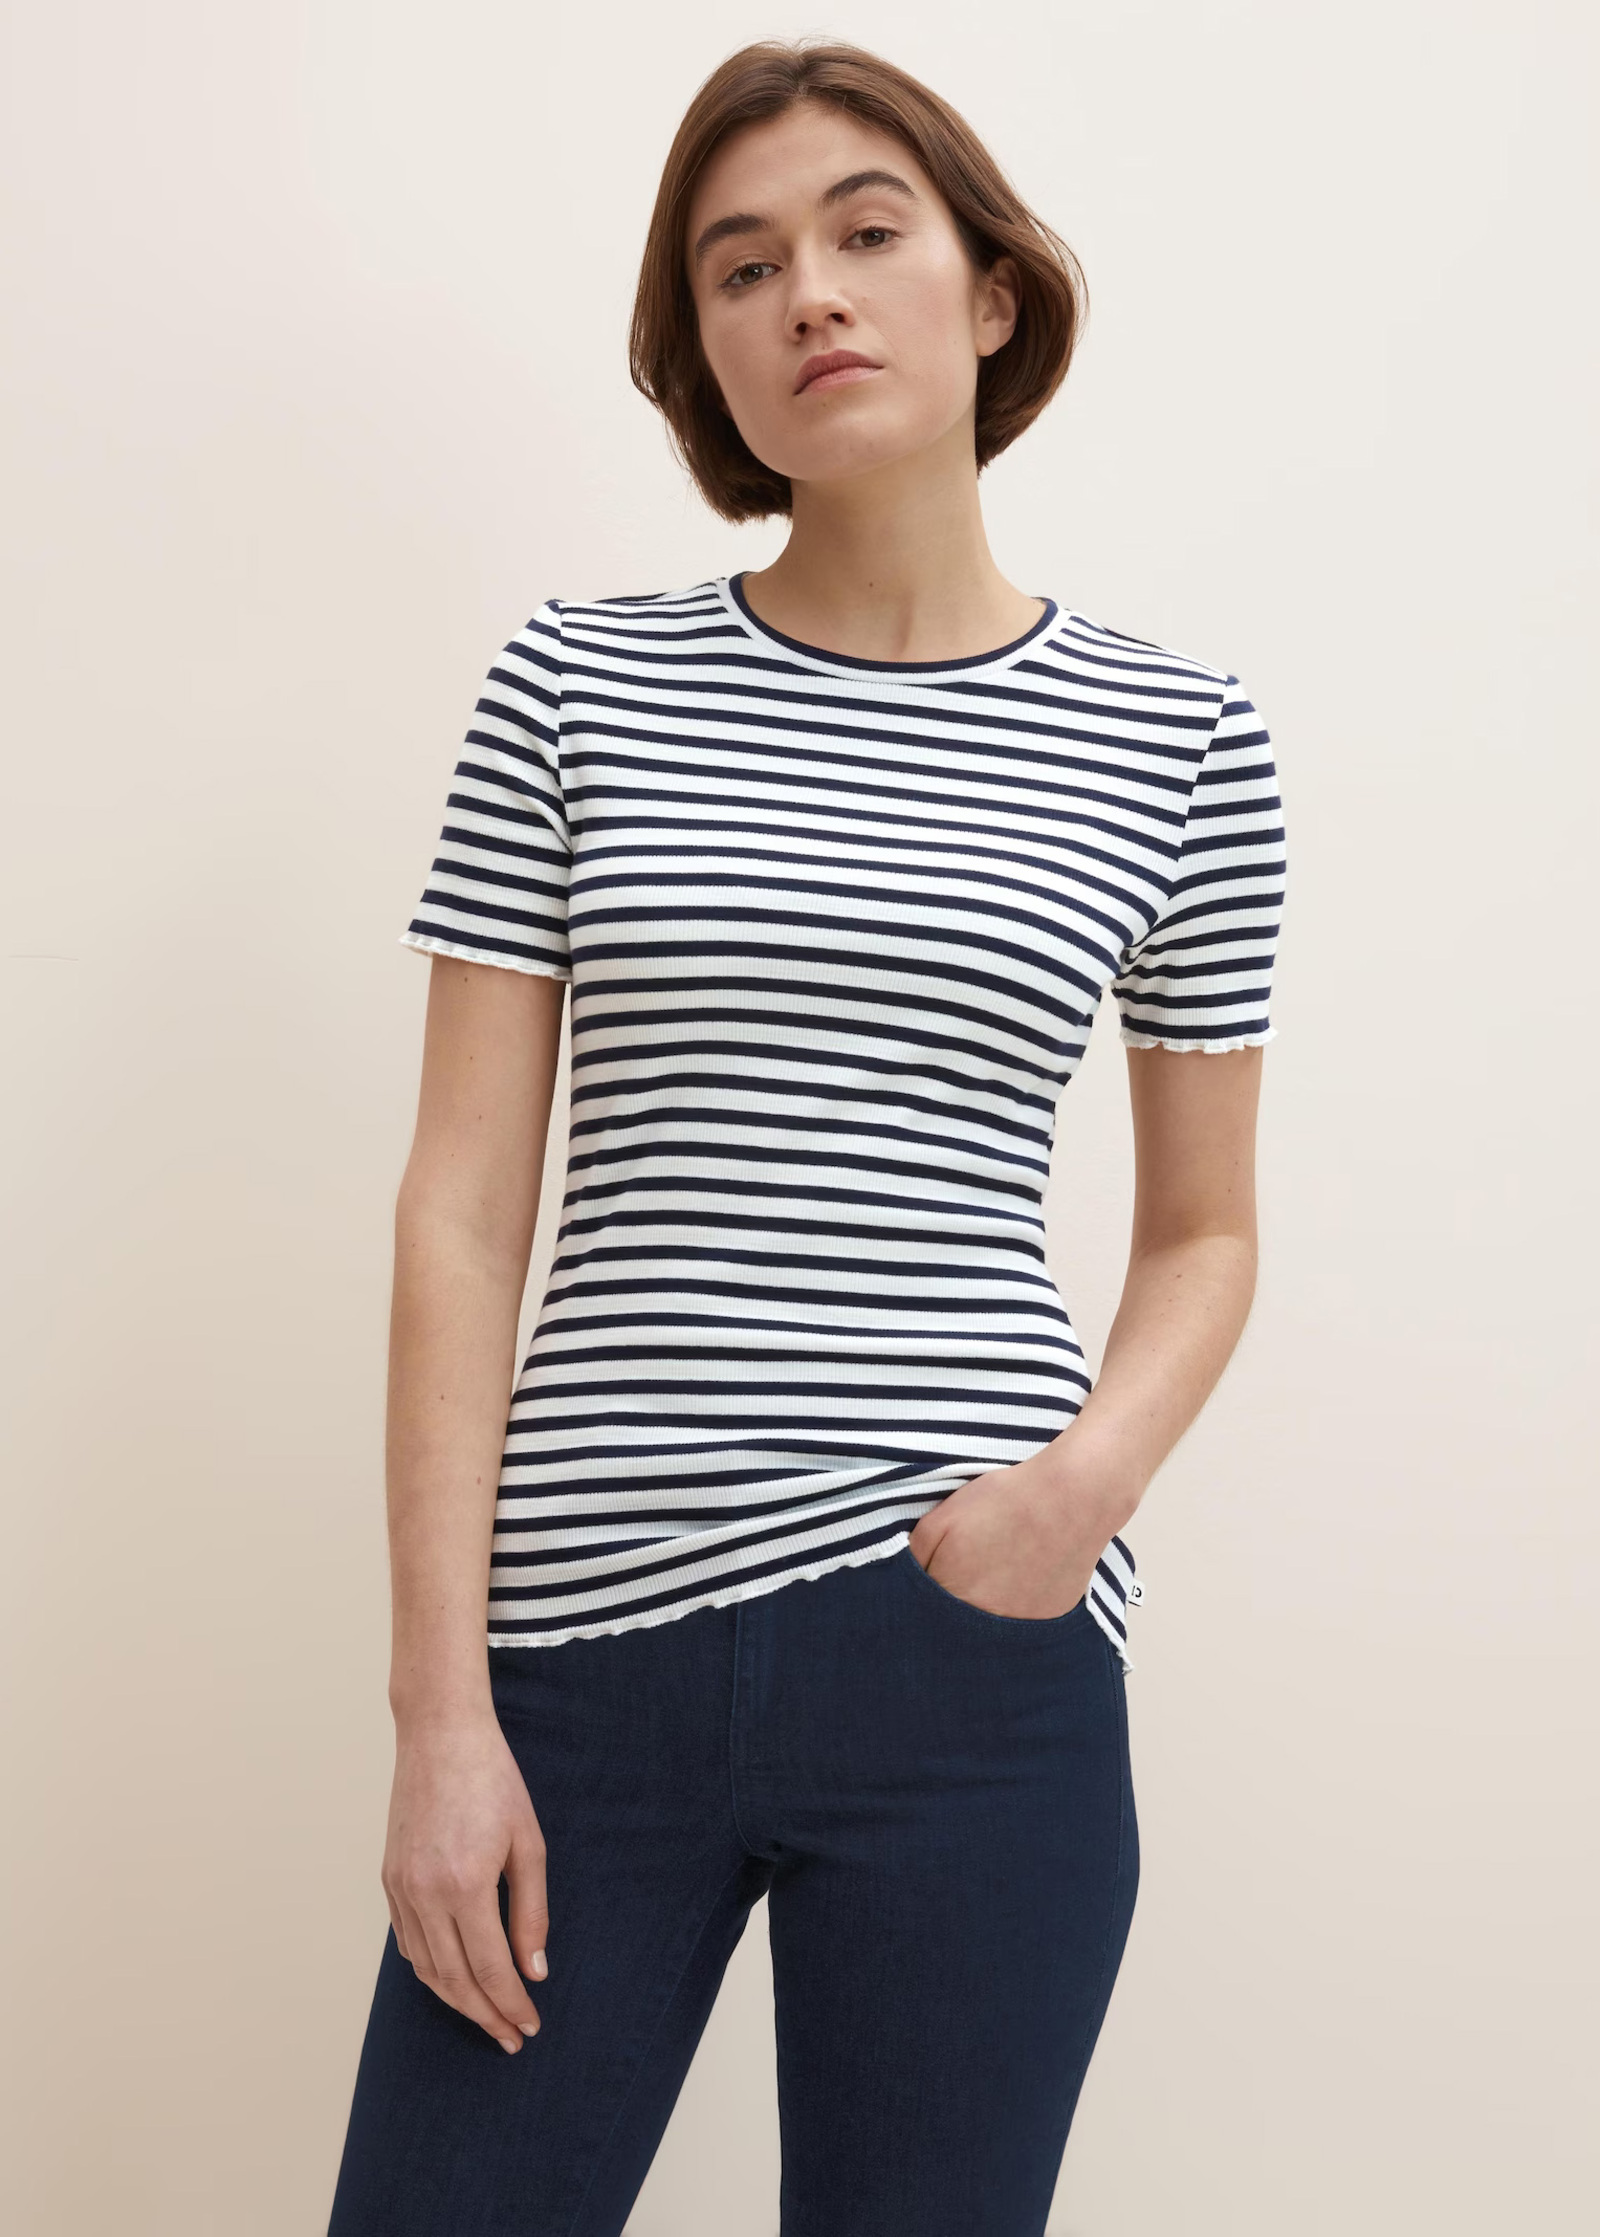 Slim - Stripe M t-shirt with Size White Tailor® Stripes Navy Tom fit